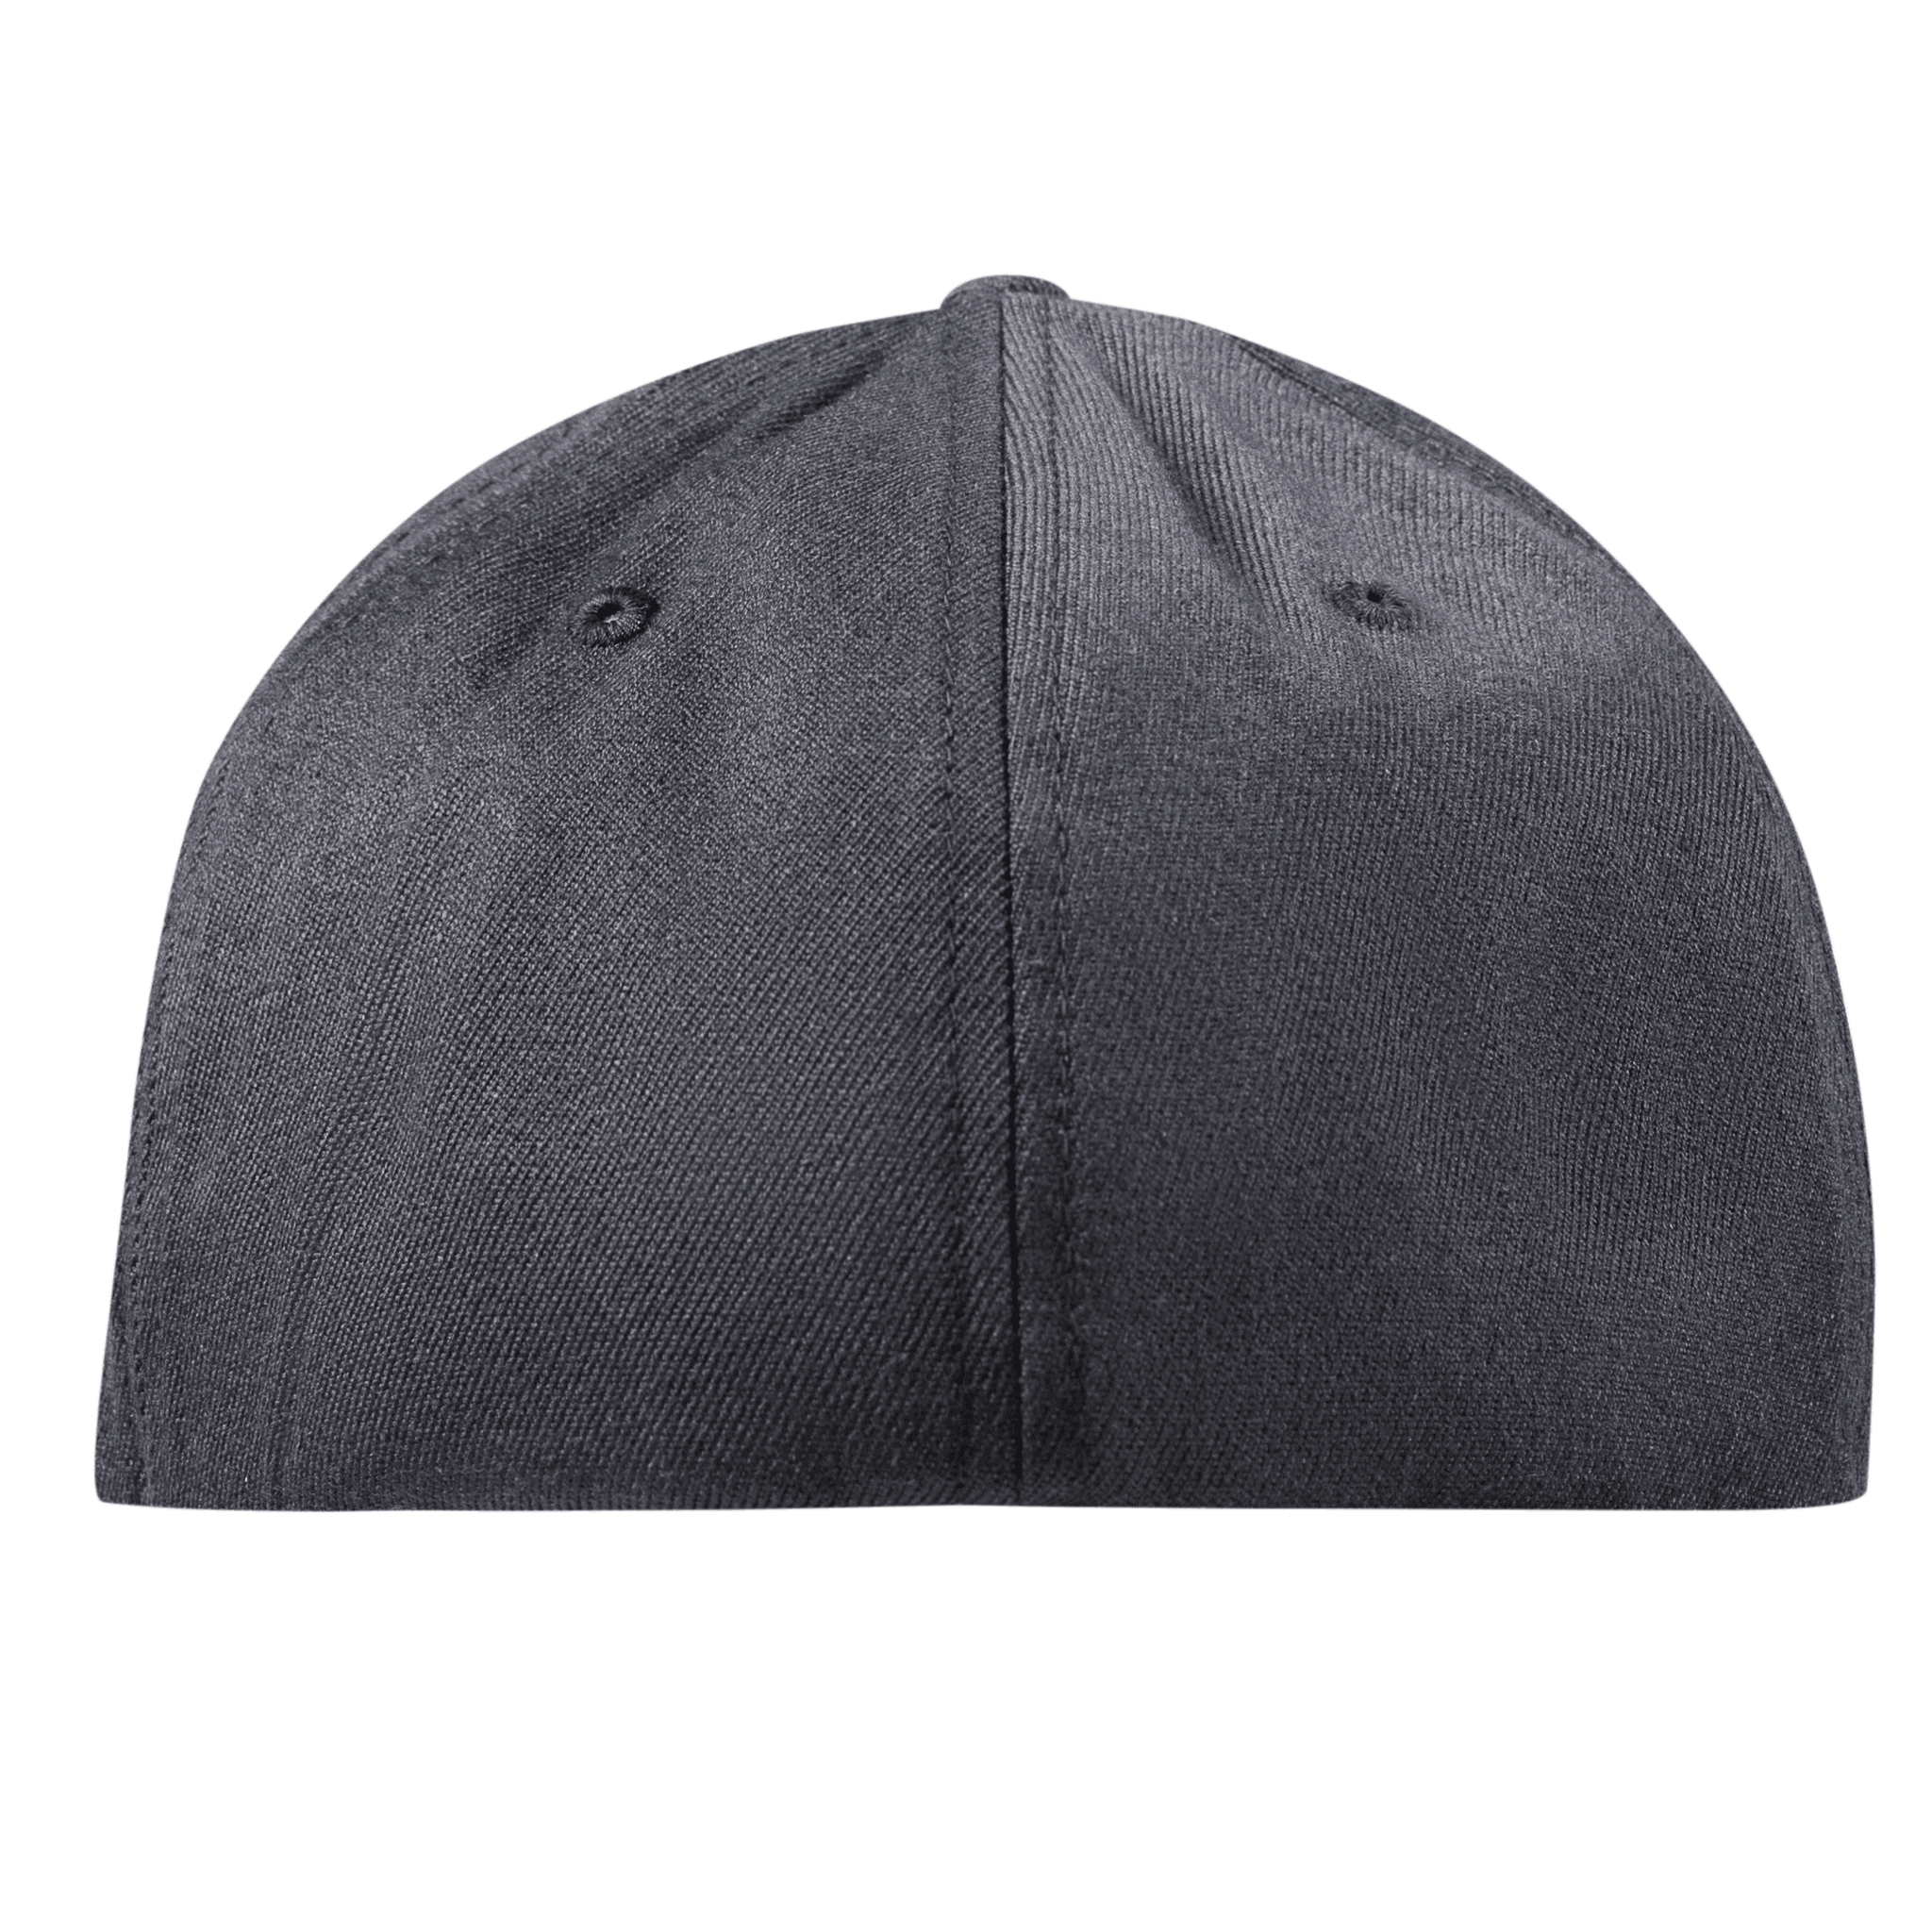 Montana 41 Midnight Flexfit Fitted Back Charcoal